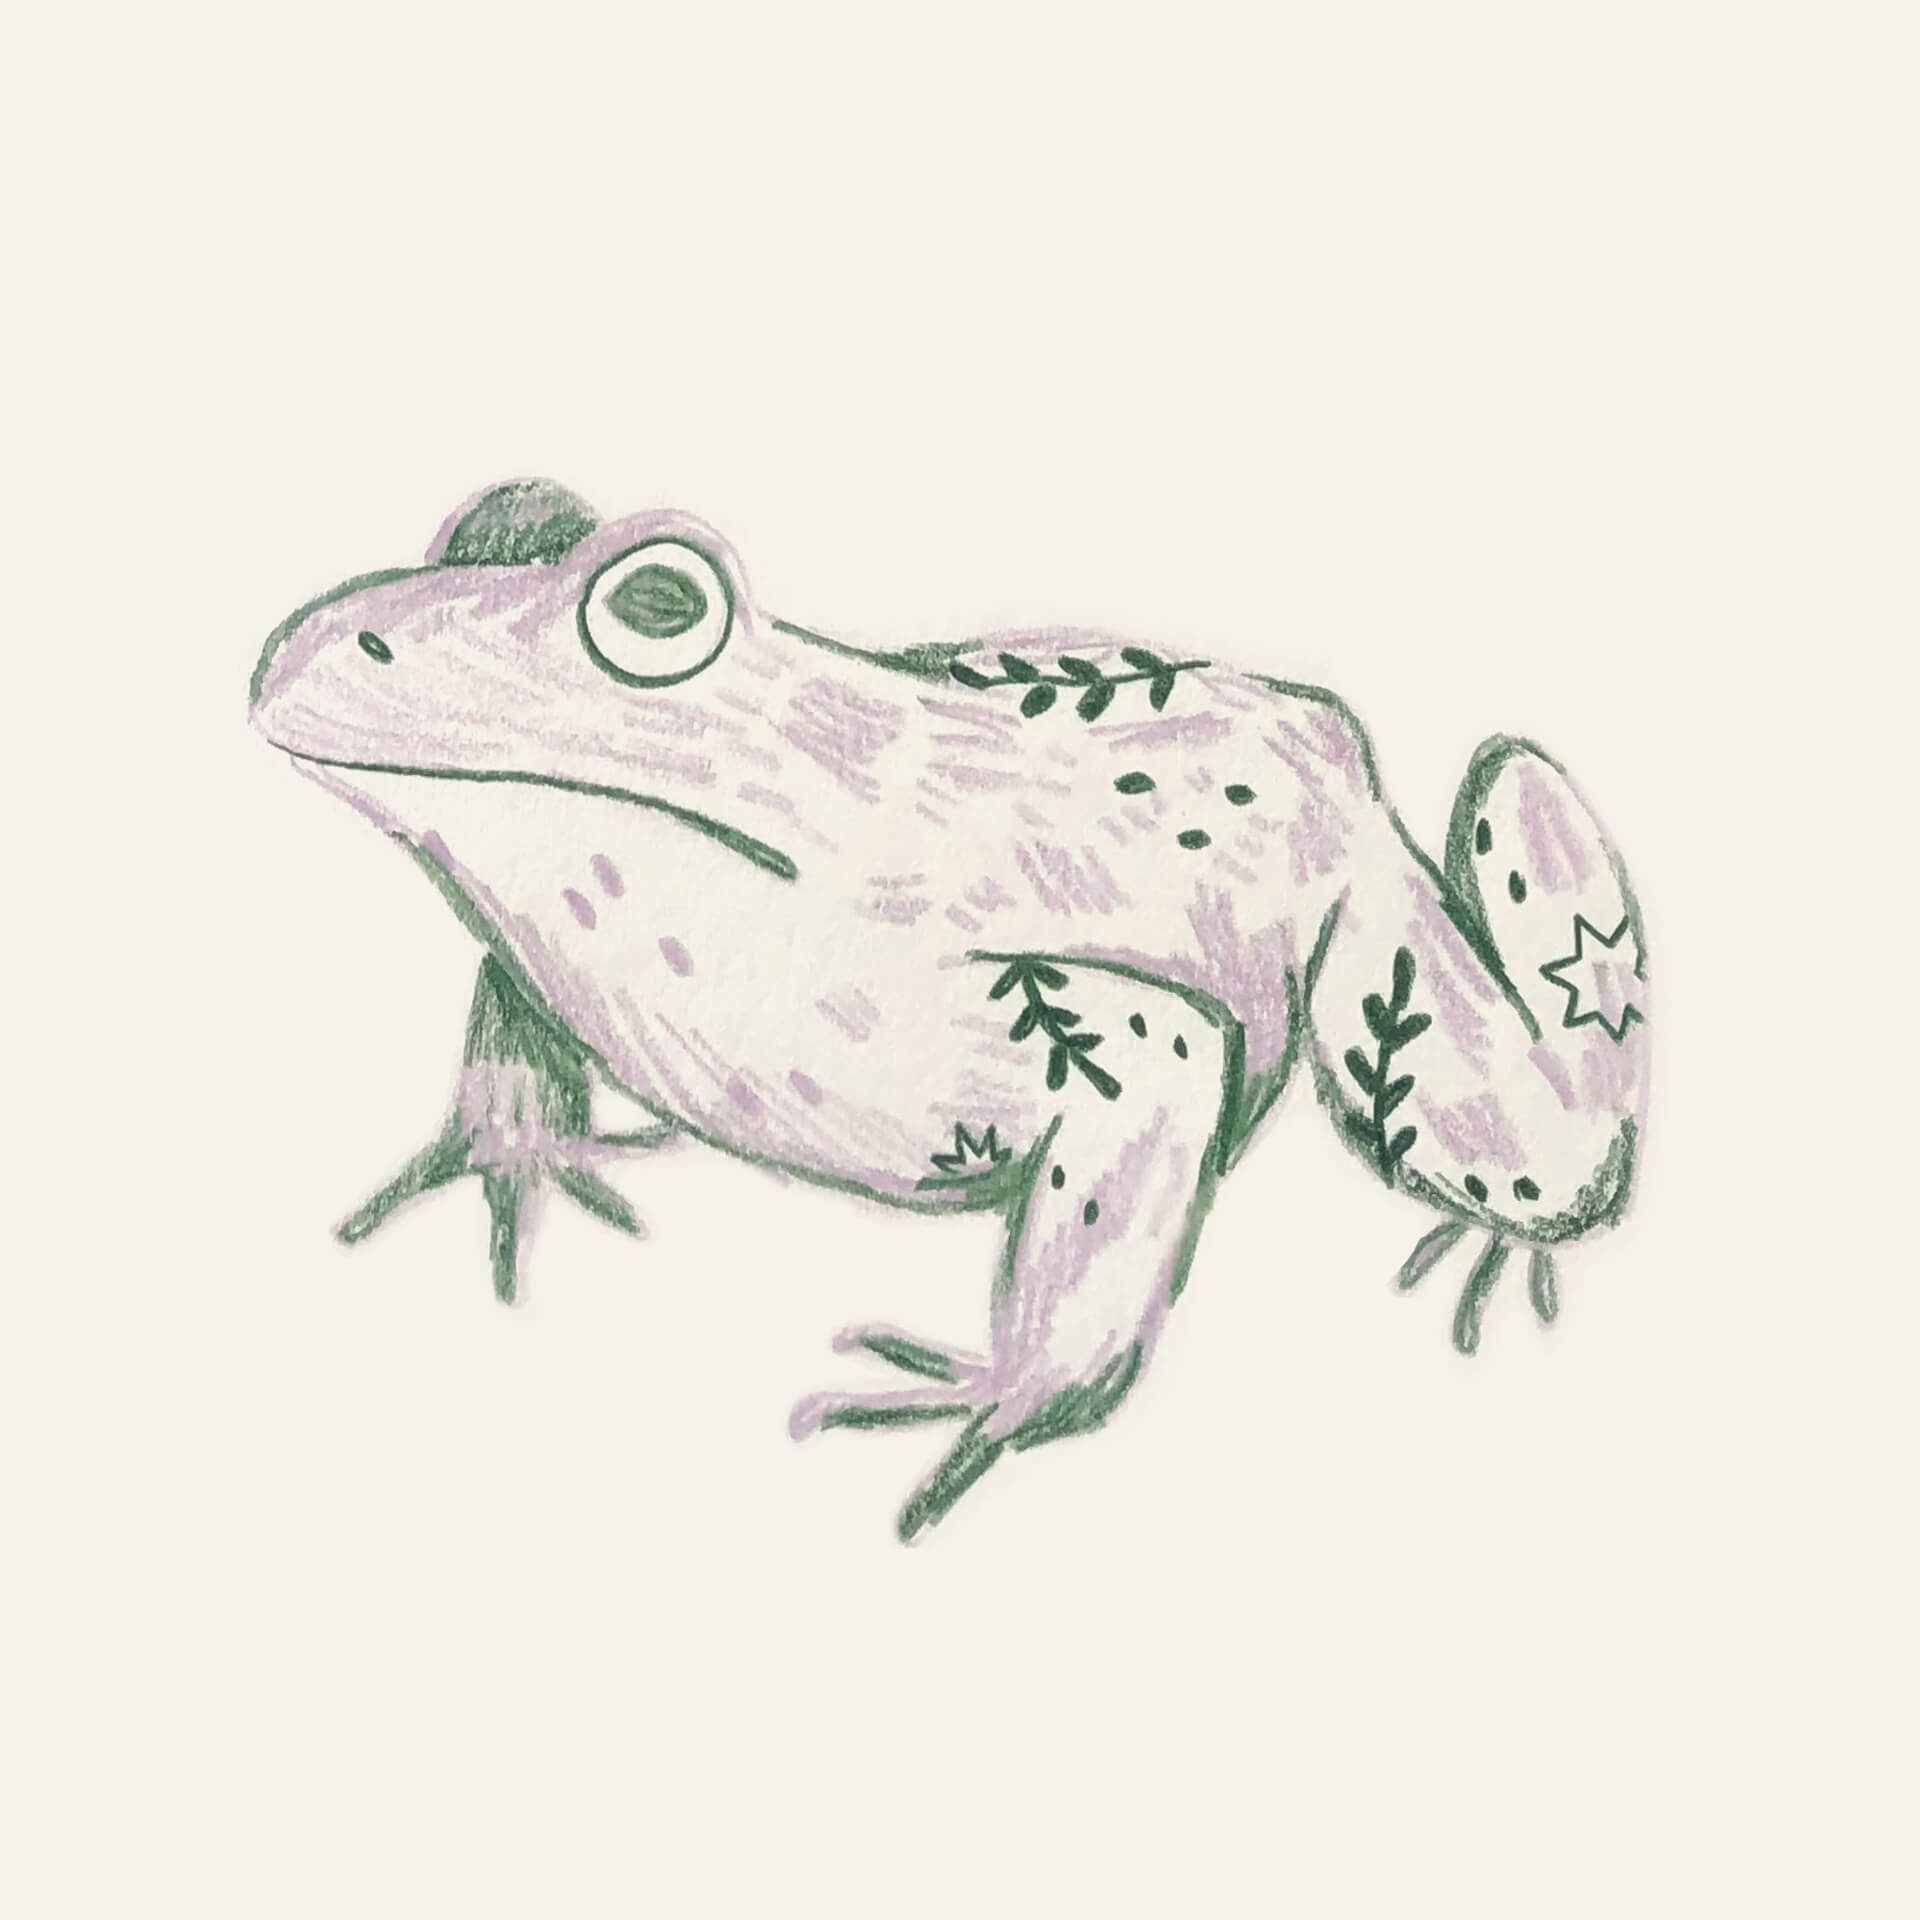 An illustrated sketch of a green and purple frog